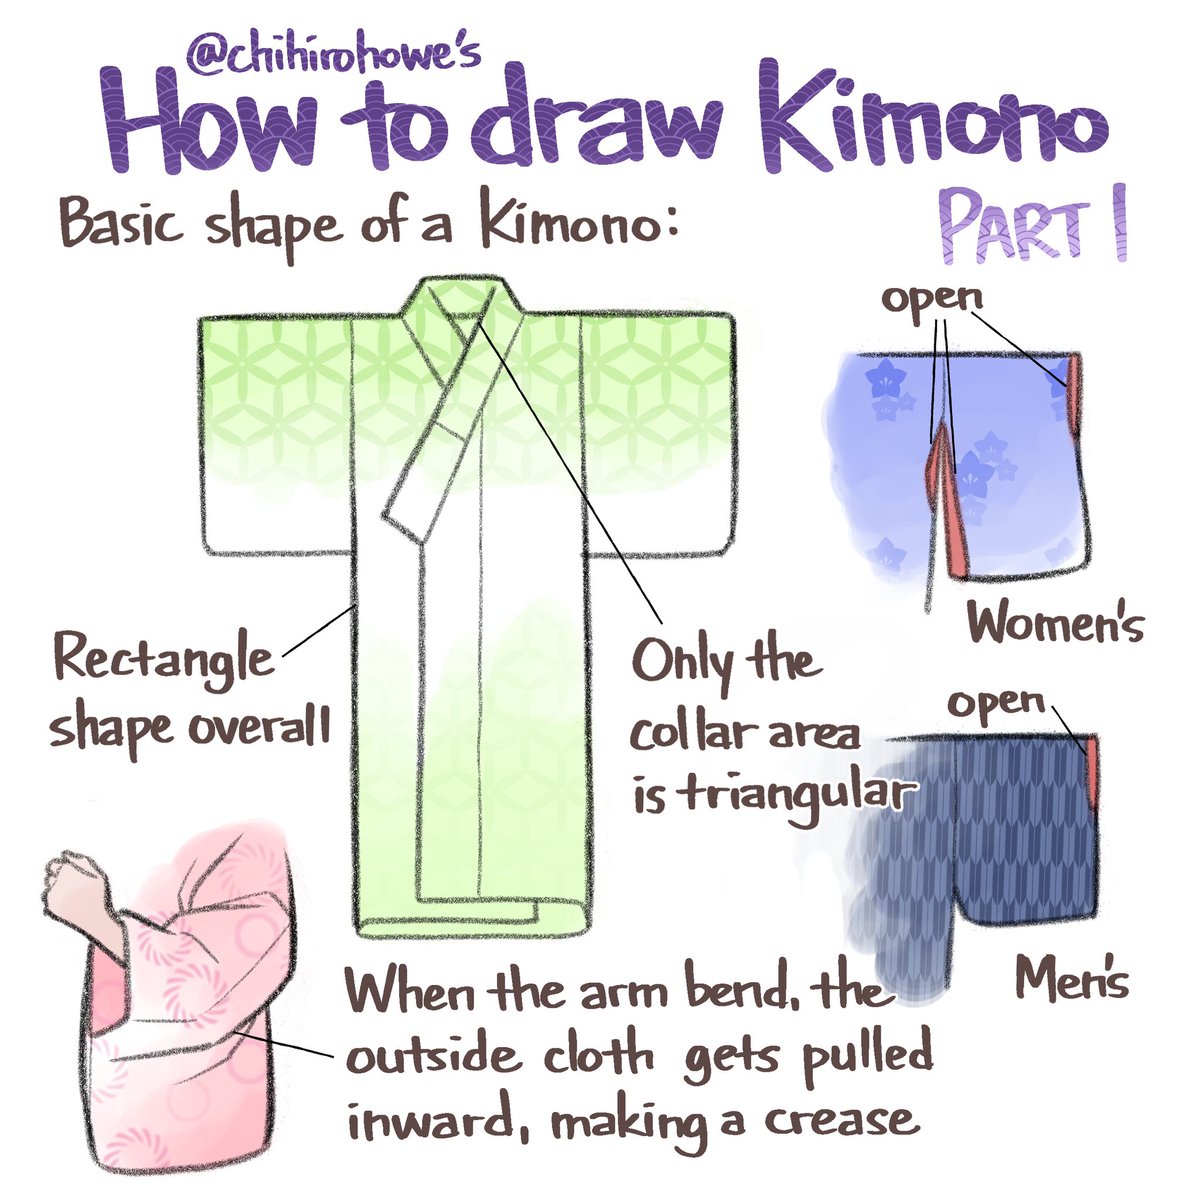  #kimono Part 1: The basic shape of a kimonoKimono is all about straight lines and squares. There are no curves, and the only triangle bit is the collar area.The basic shapes are the same for men and women, but the holes in sleeves are different.